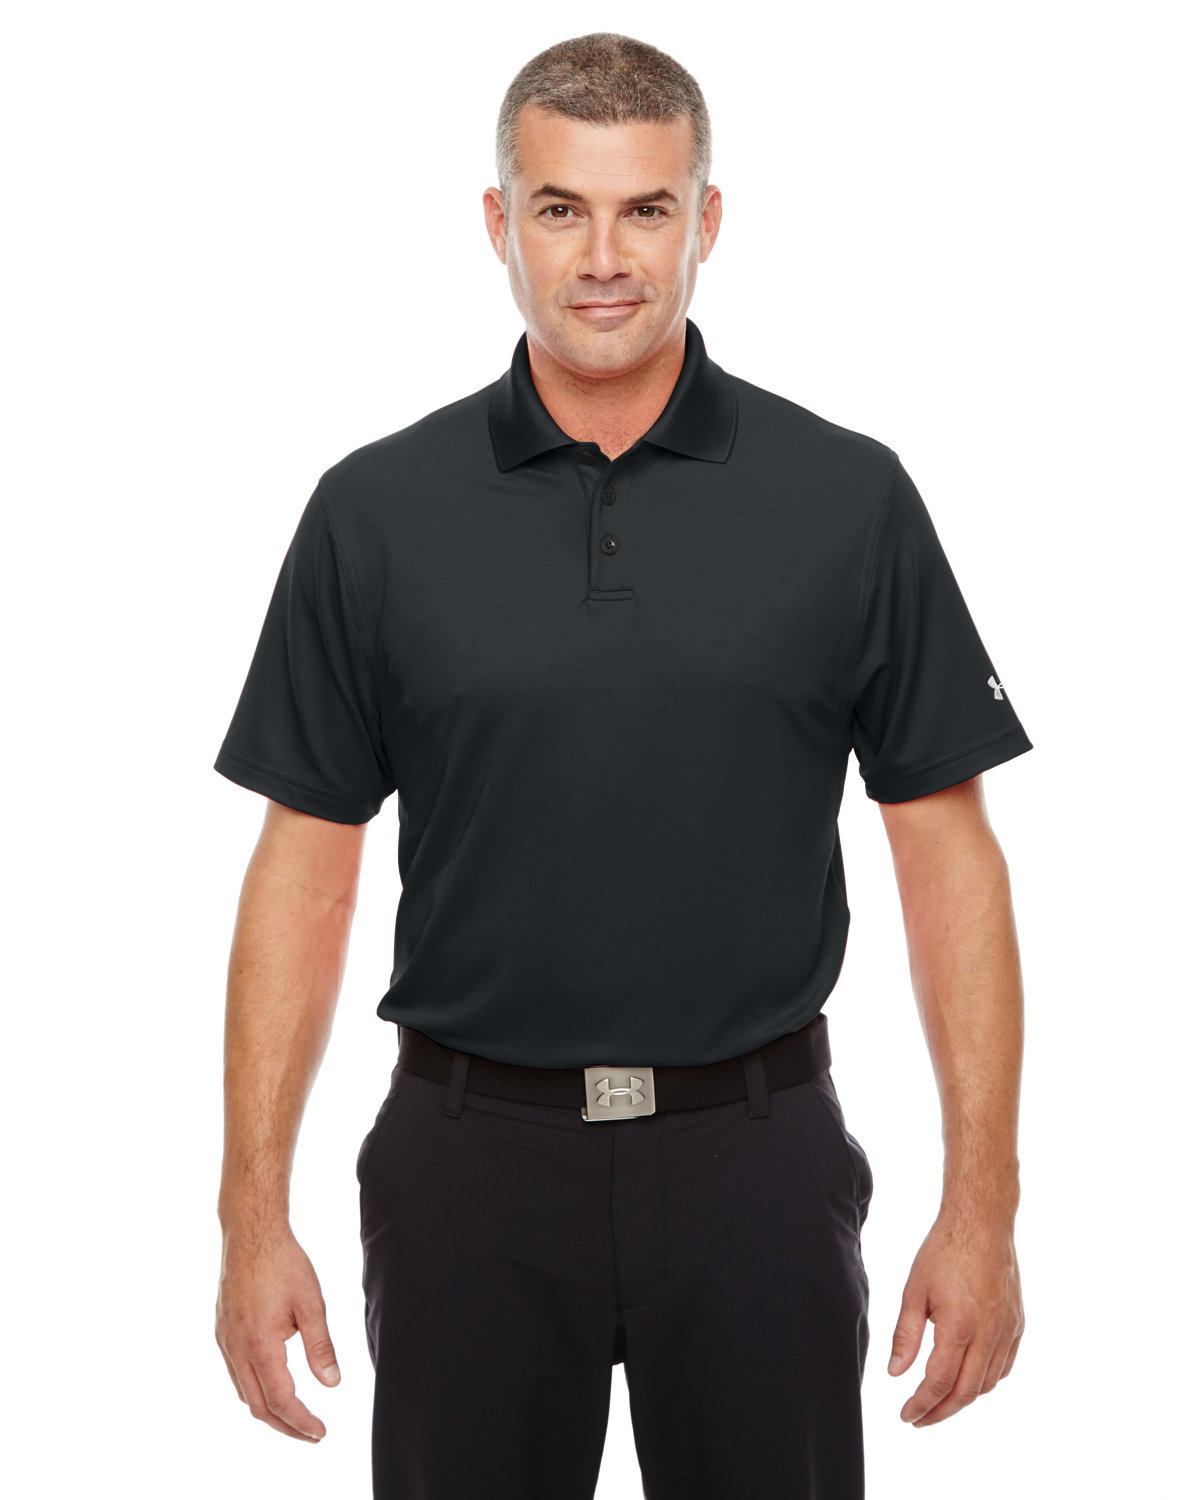 Under Armour 1261172 Men's Performance Polo | Shirts Direct